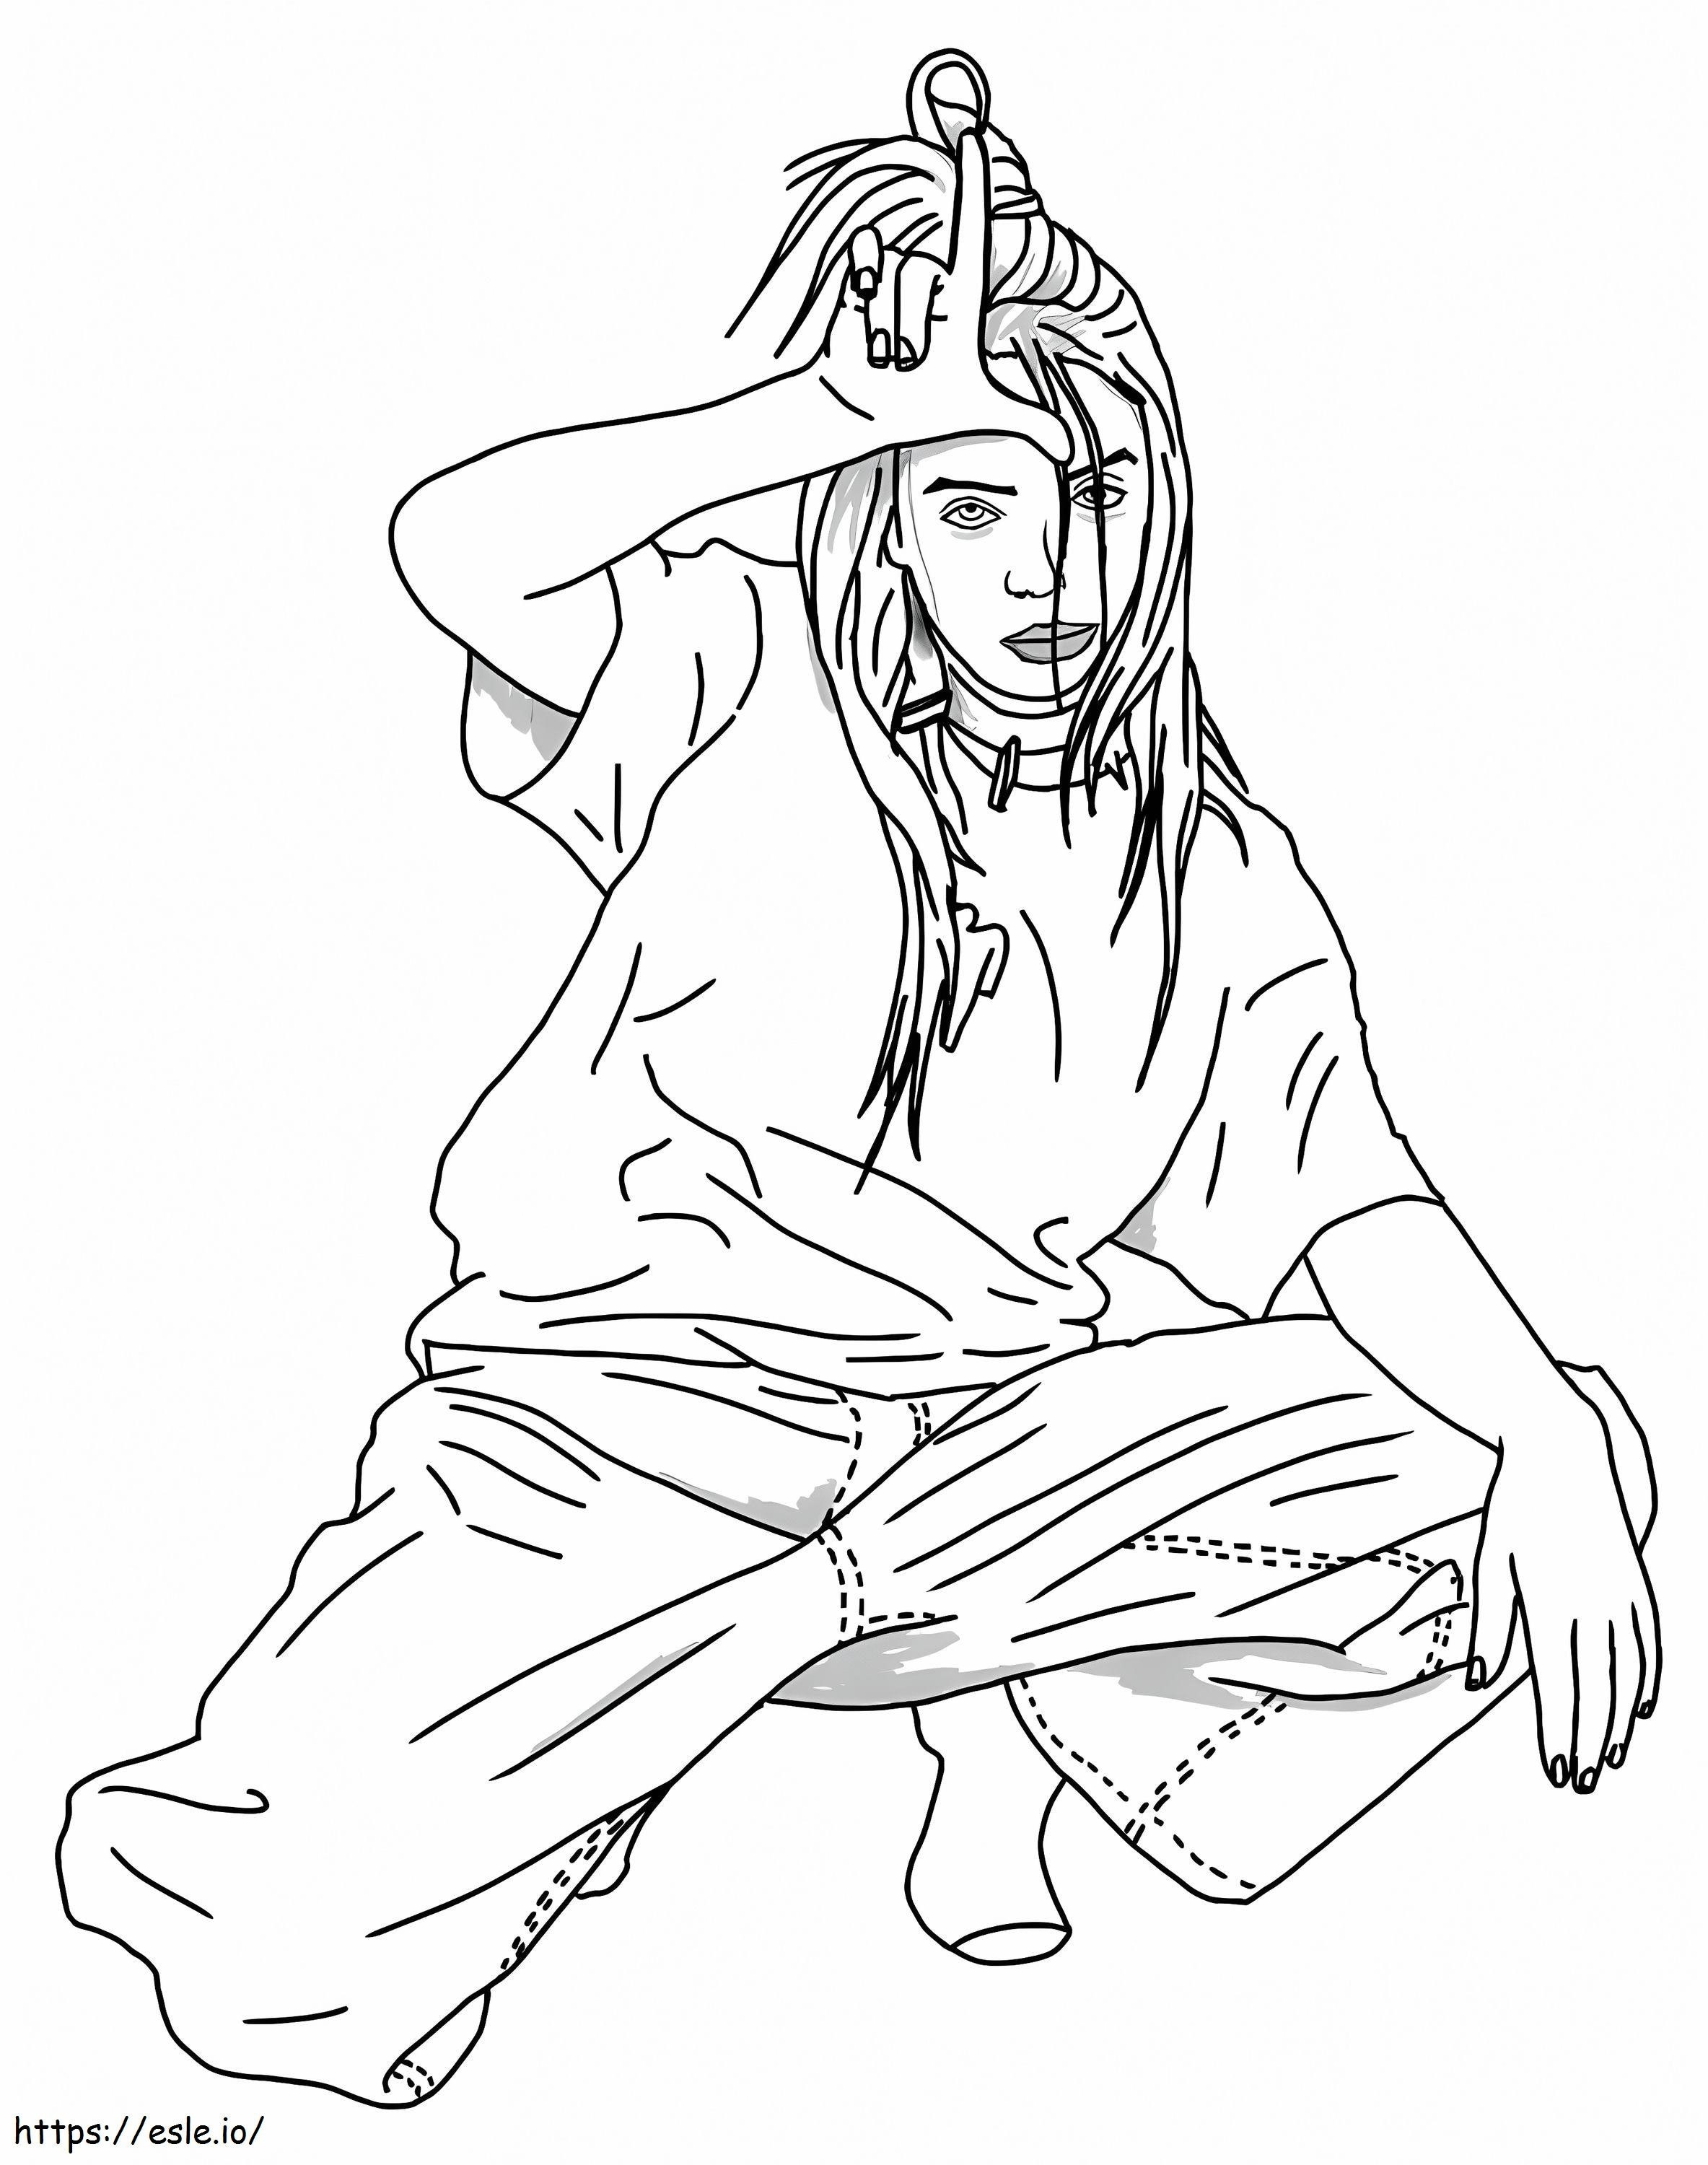 Billie Eilish Poses coloring page